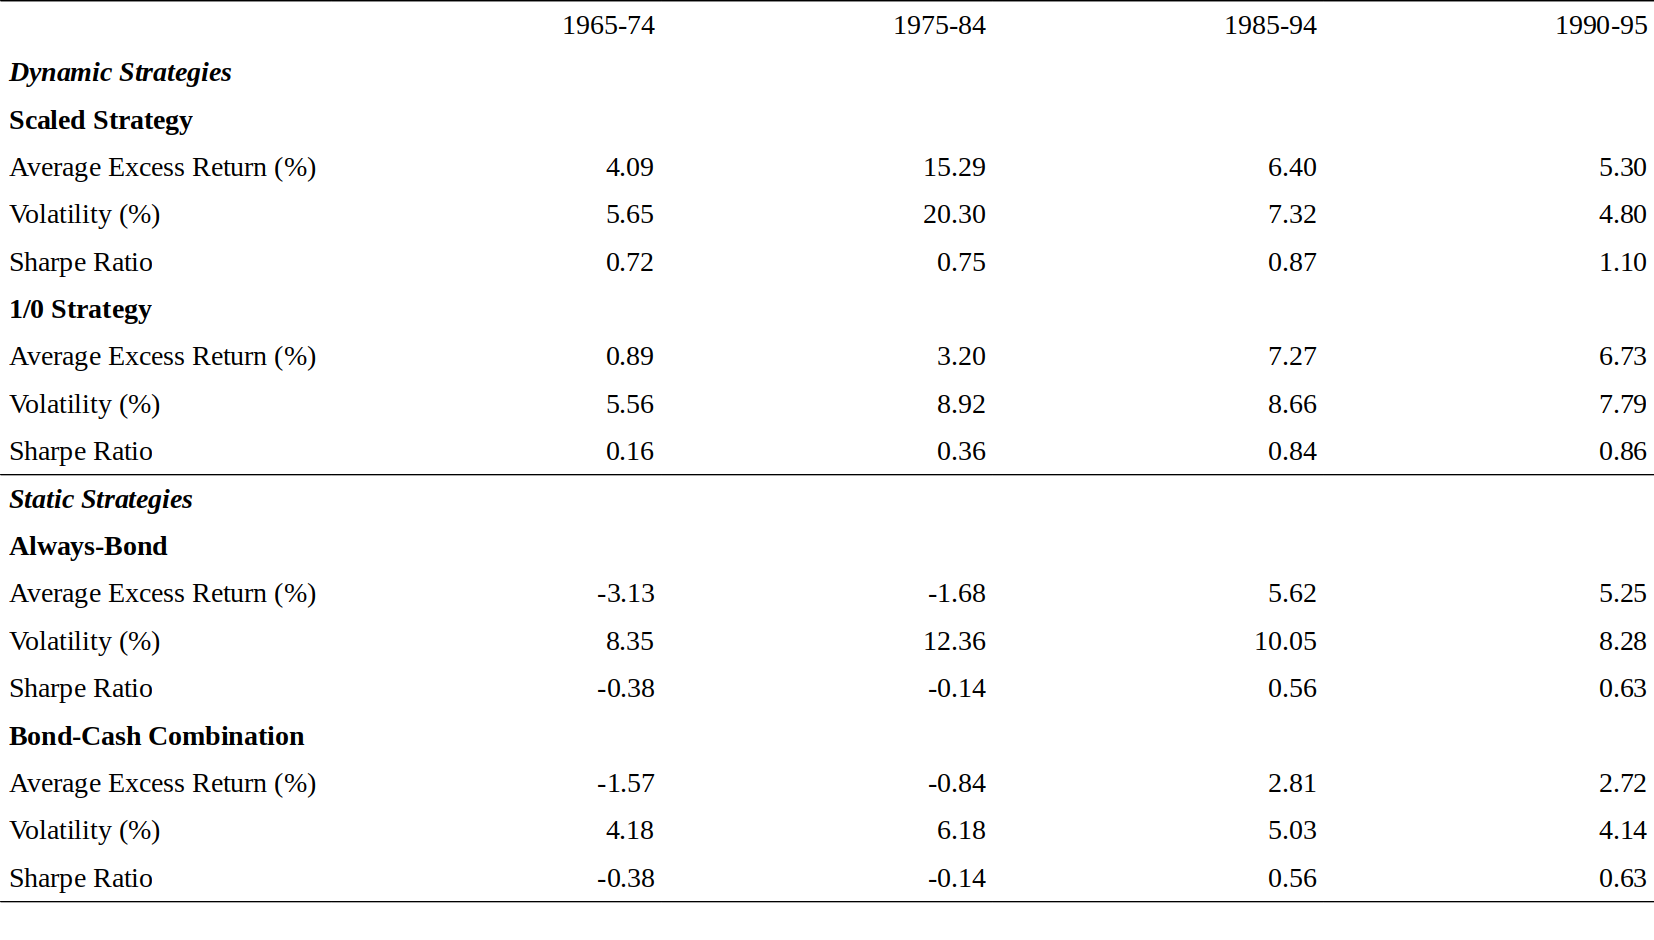 Figure 4.10 Subperiod Performance of Various Investment Strategies, 1965-95